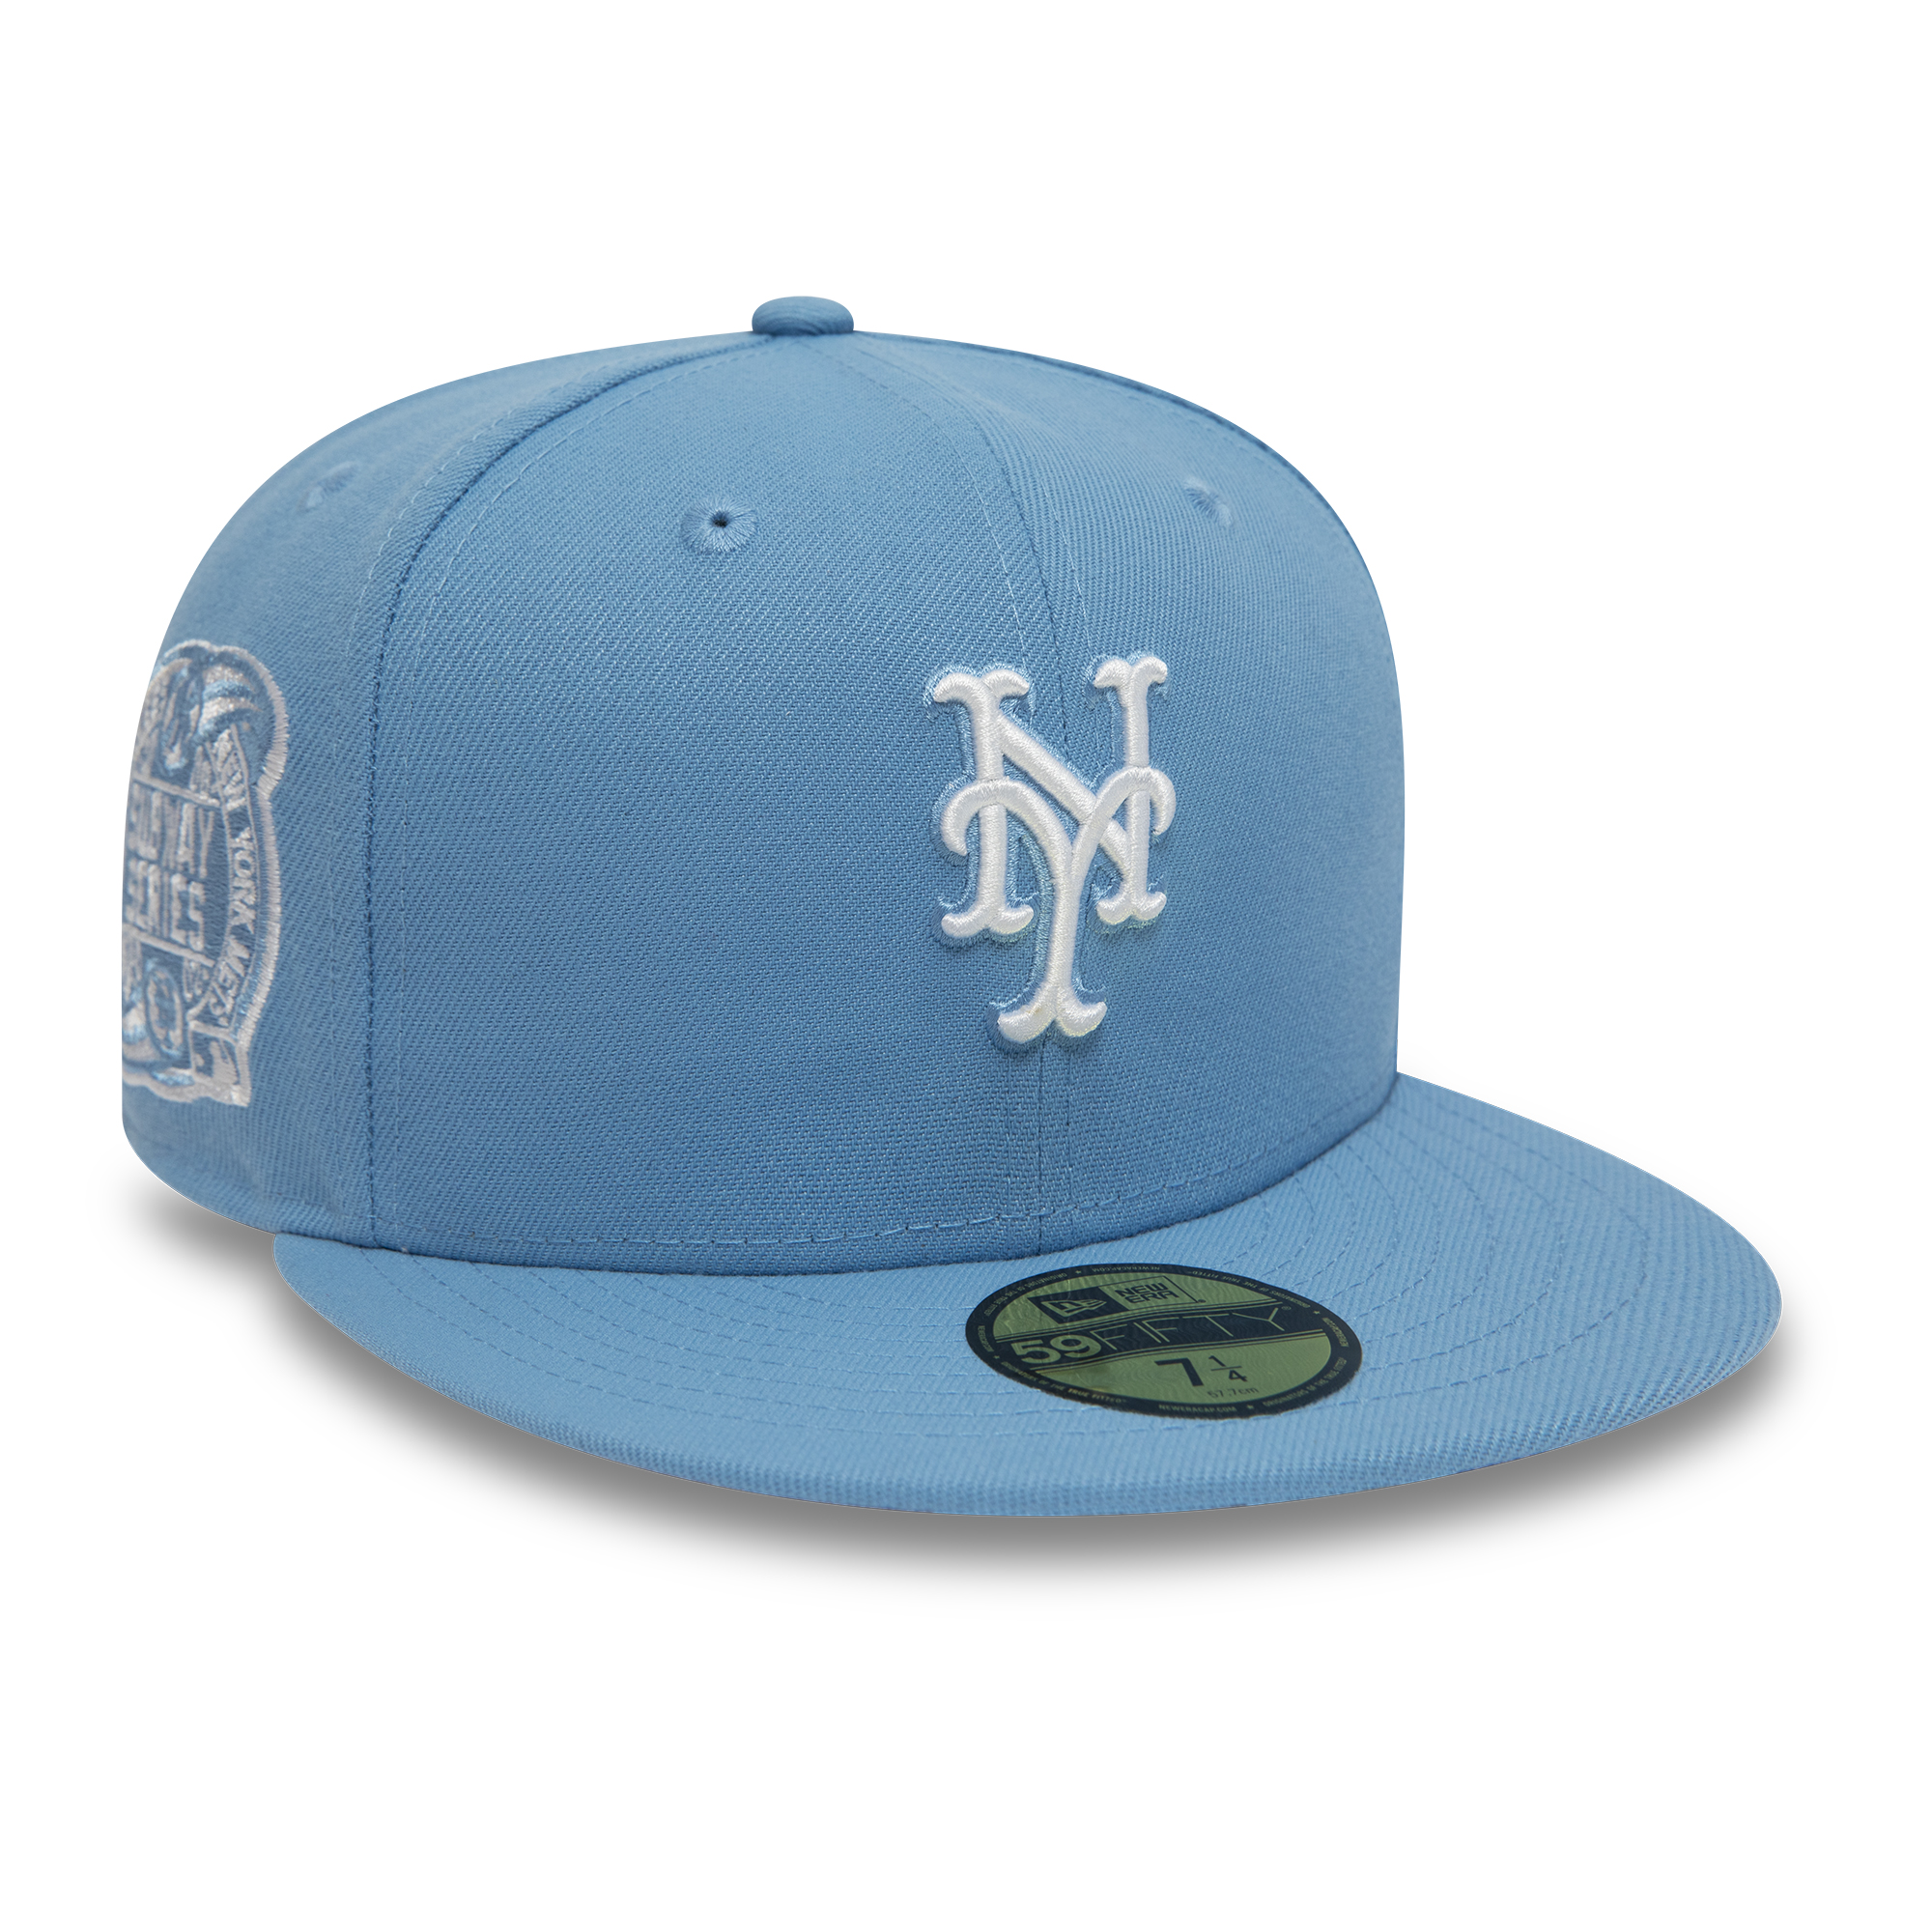 Best Mets and Yankees hats, jerseys, gear for the Subway Series